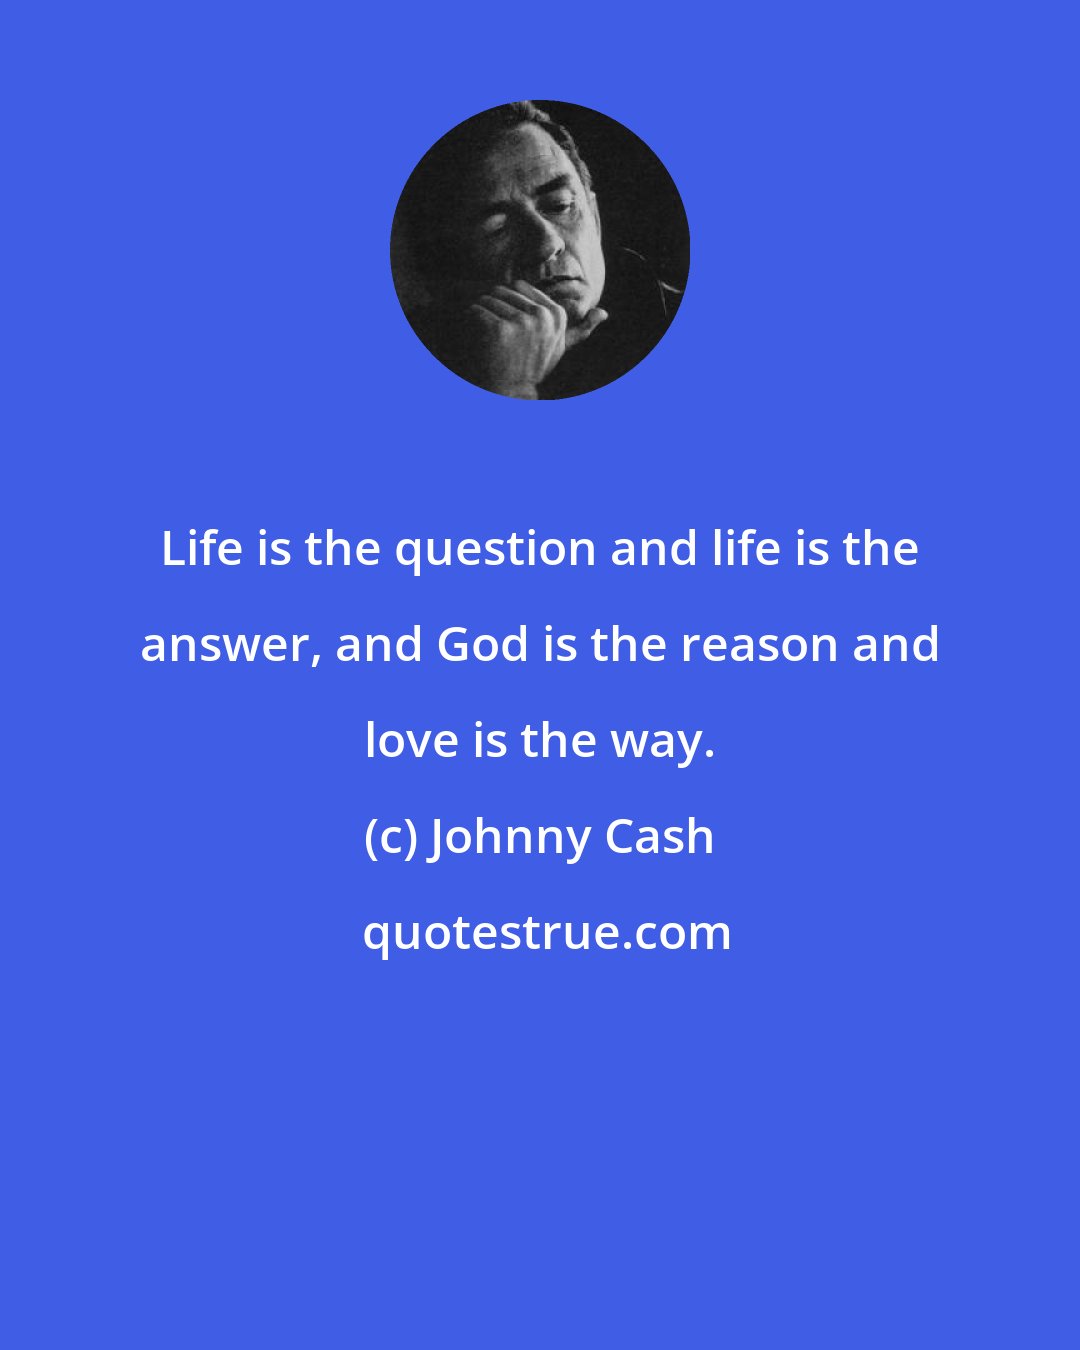 Johnny Cash: Life is the question and life is the answer, and God is the reason and love is the way.